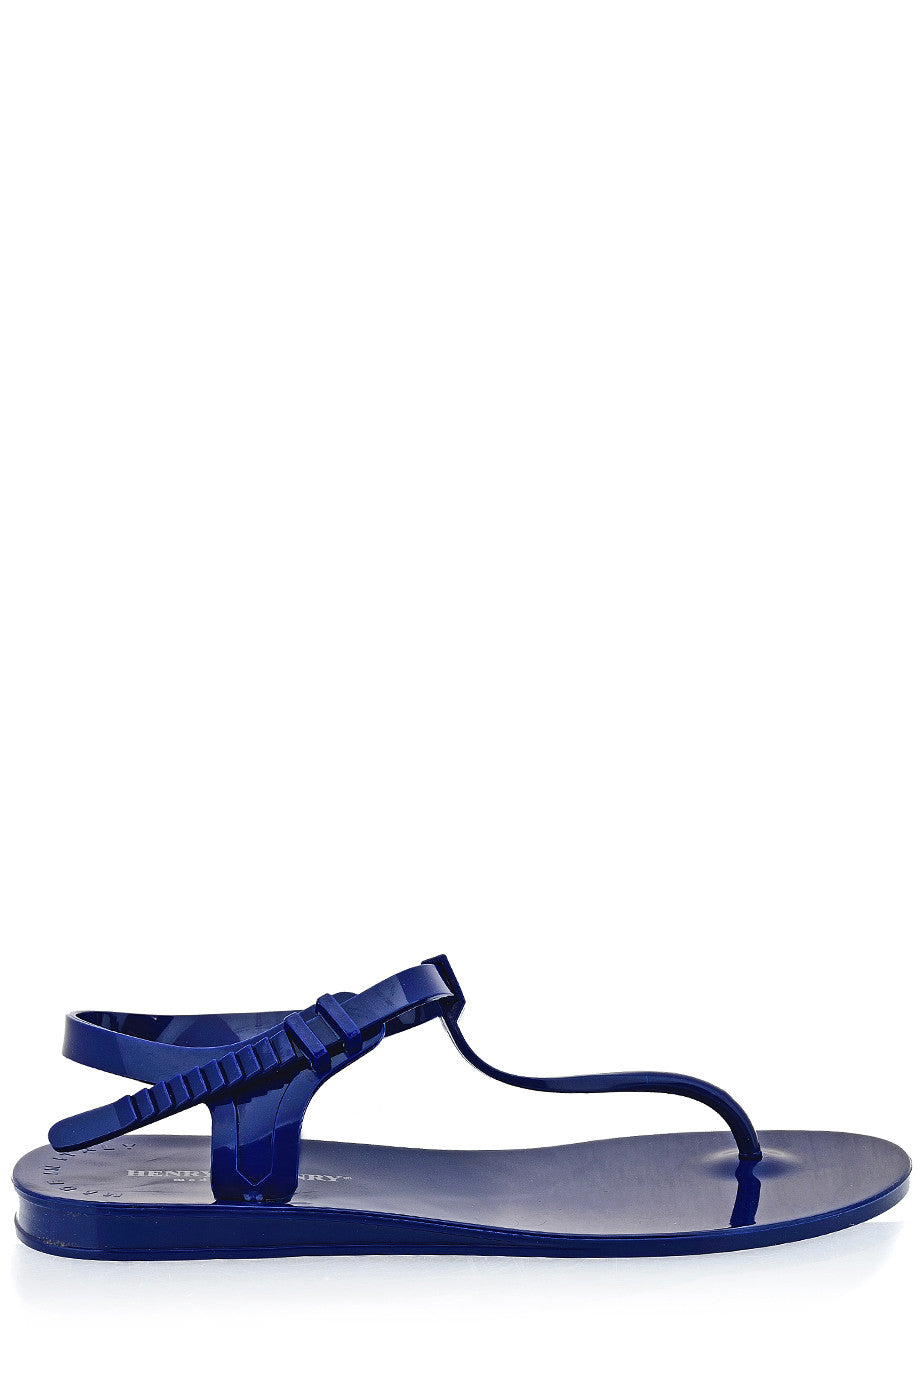 Blue Suede Hollow Out Strappy Point Head Roman Flats Sandals Shoes